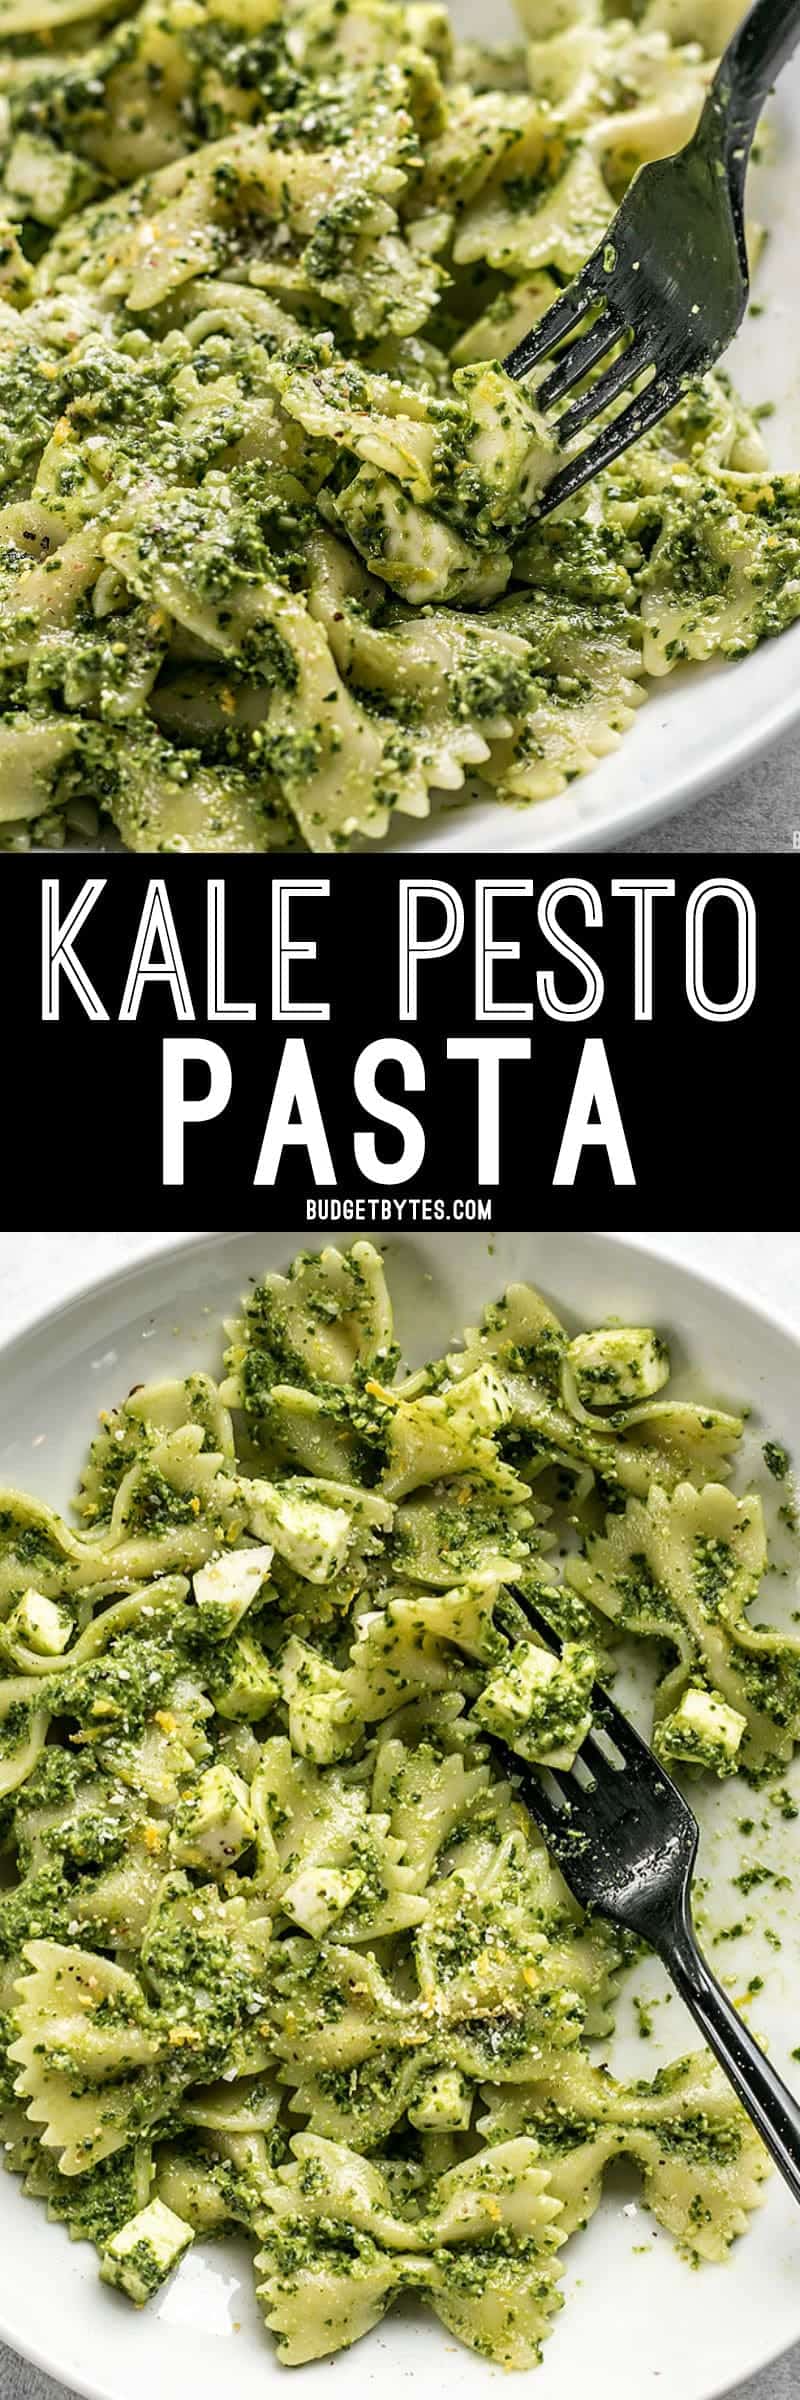 Kale makes a great inexpensive and earthy pesto! Dress up this Kale Pesto pasta with add-ins to make it a meal, or keep it simple for the perfect summer side. BudgetBytes.com